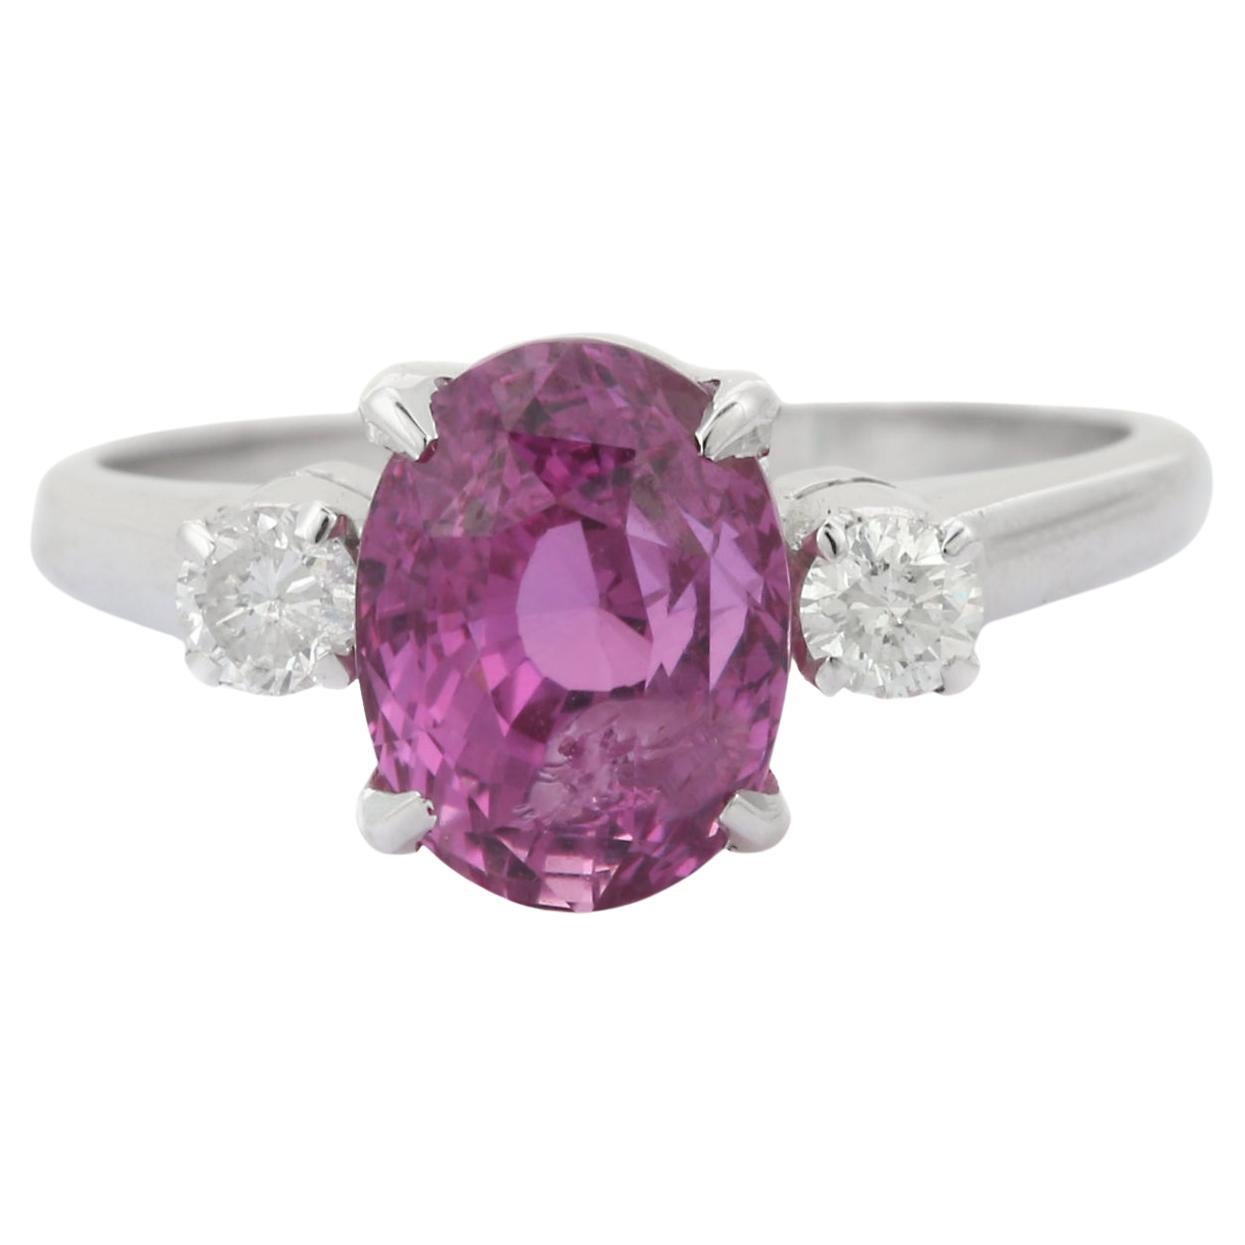 3.66 Carat Three Stone Pink Sapphire and Diamond Ring in 18K White Gold